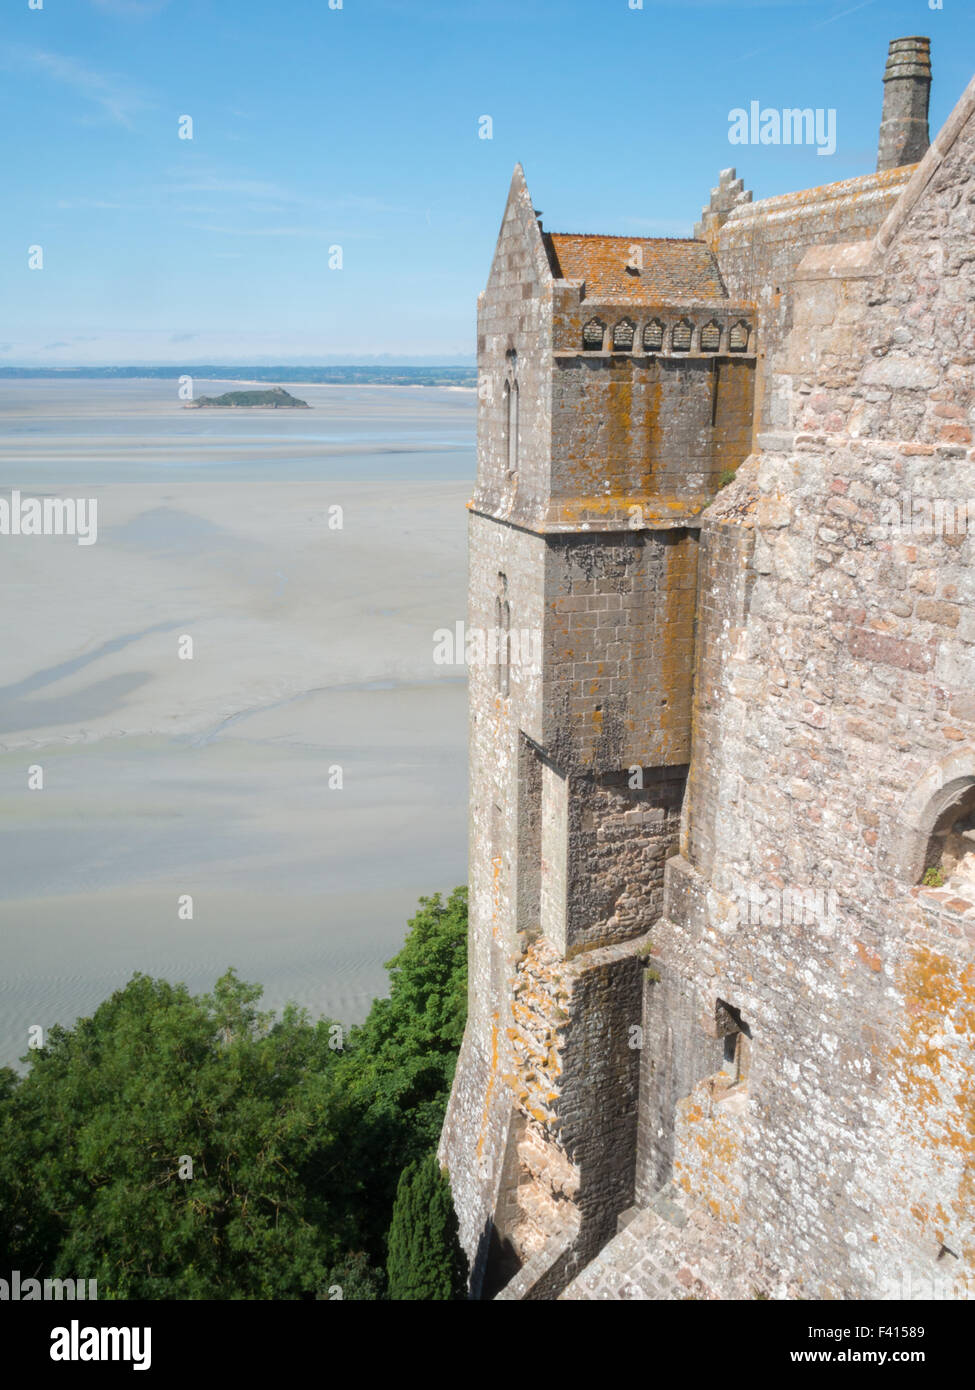 View of the wall of Mont Saint-Michel with low tide in backgrounf Stock Photo